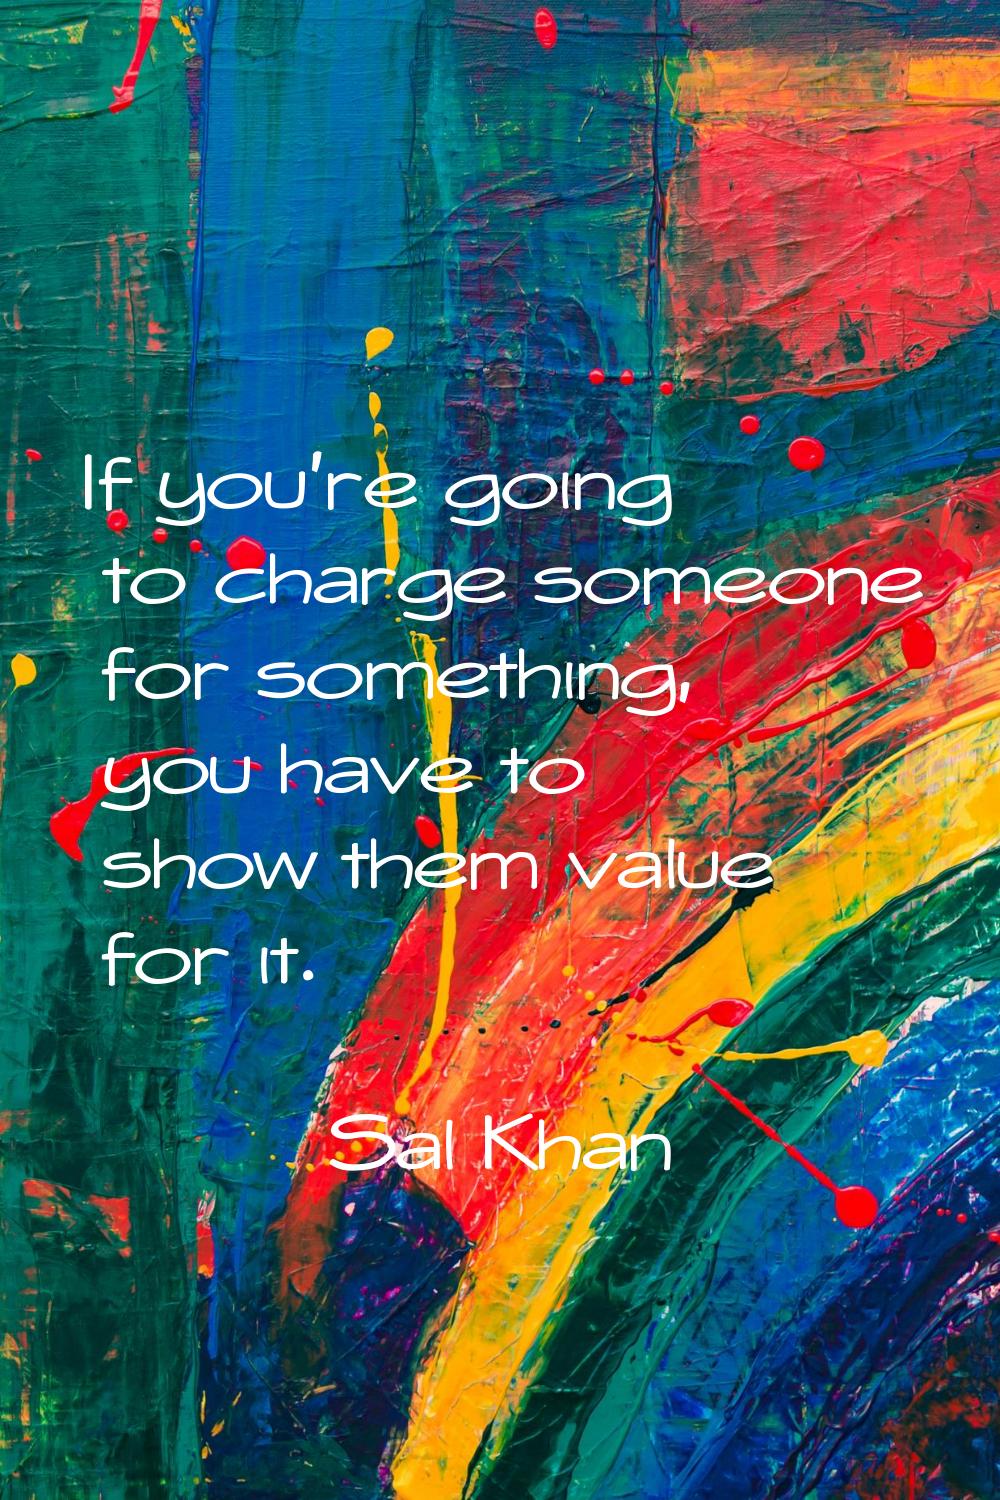 If you're going to charge someone for something, you have to show them value for it.